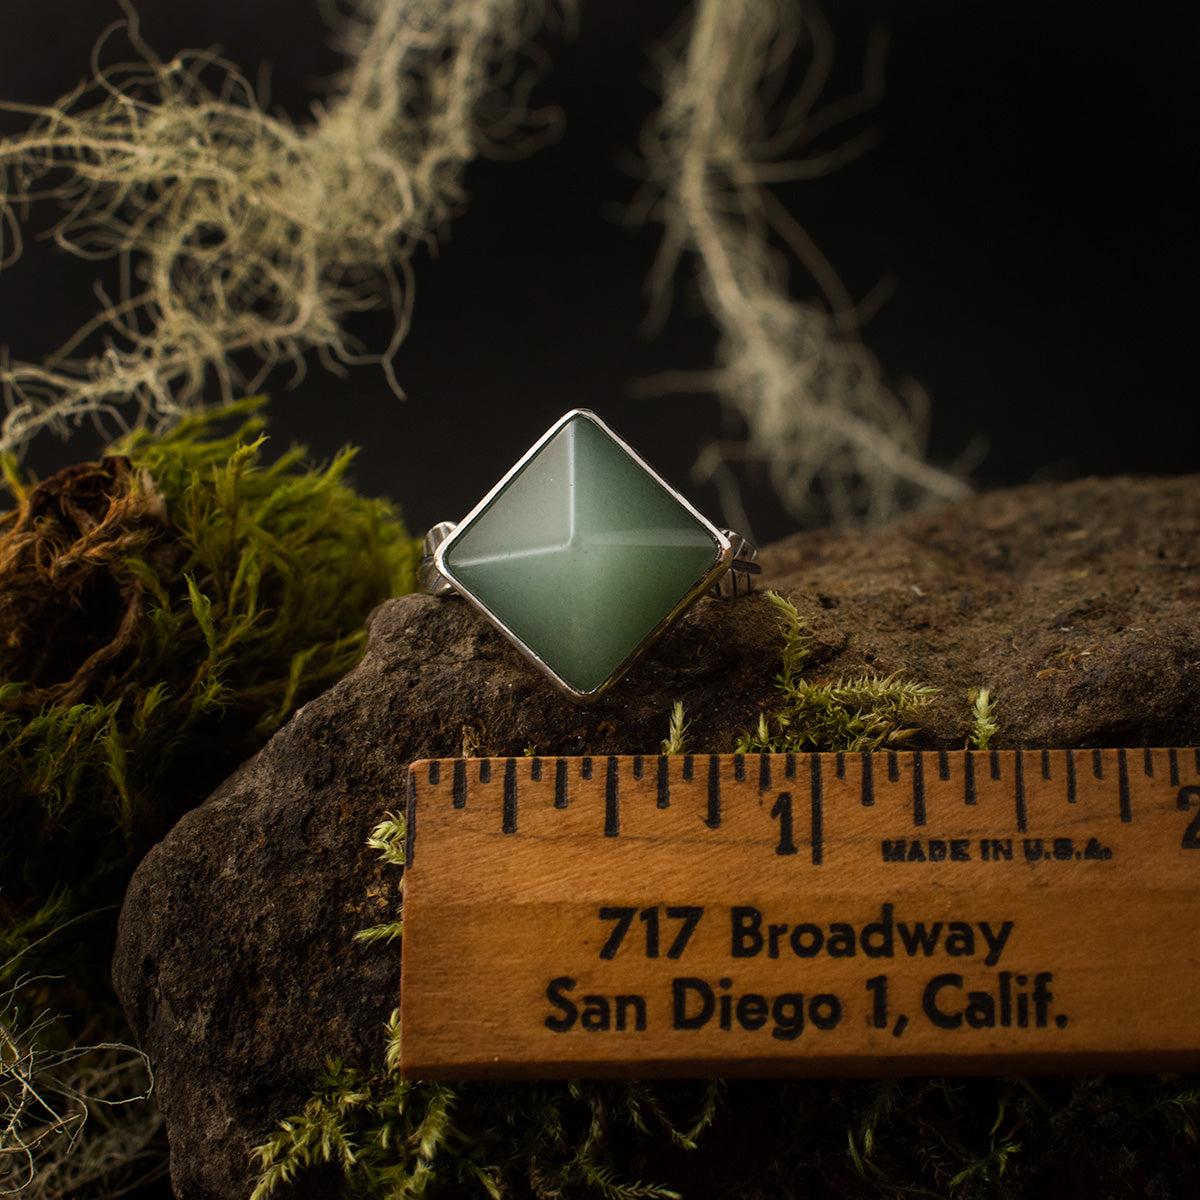 The Aventurine Pyramid Double Leaf Ring with a ruler for scale, measuring around 3/4 inches wide from point to point.